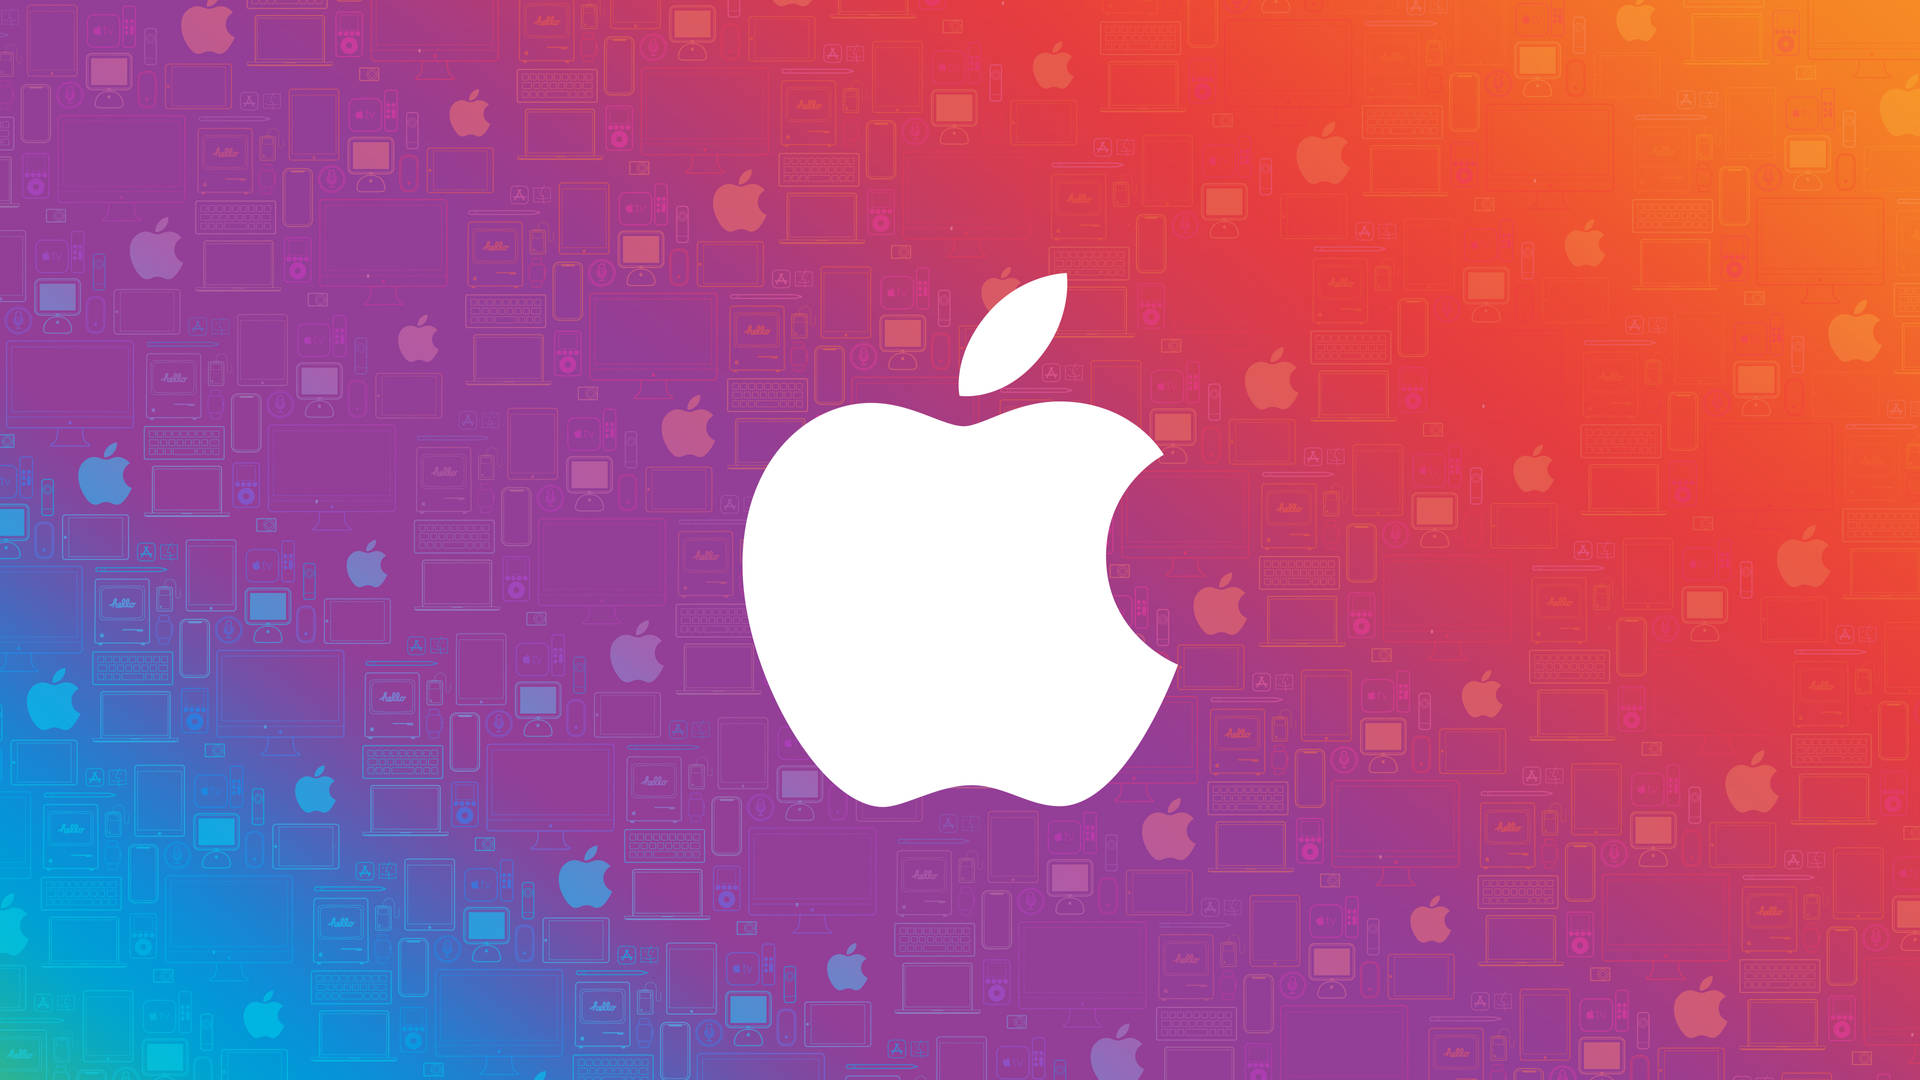 Apple Logo In Colorful Background Wallpaper